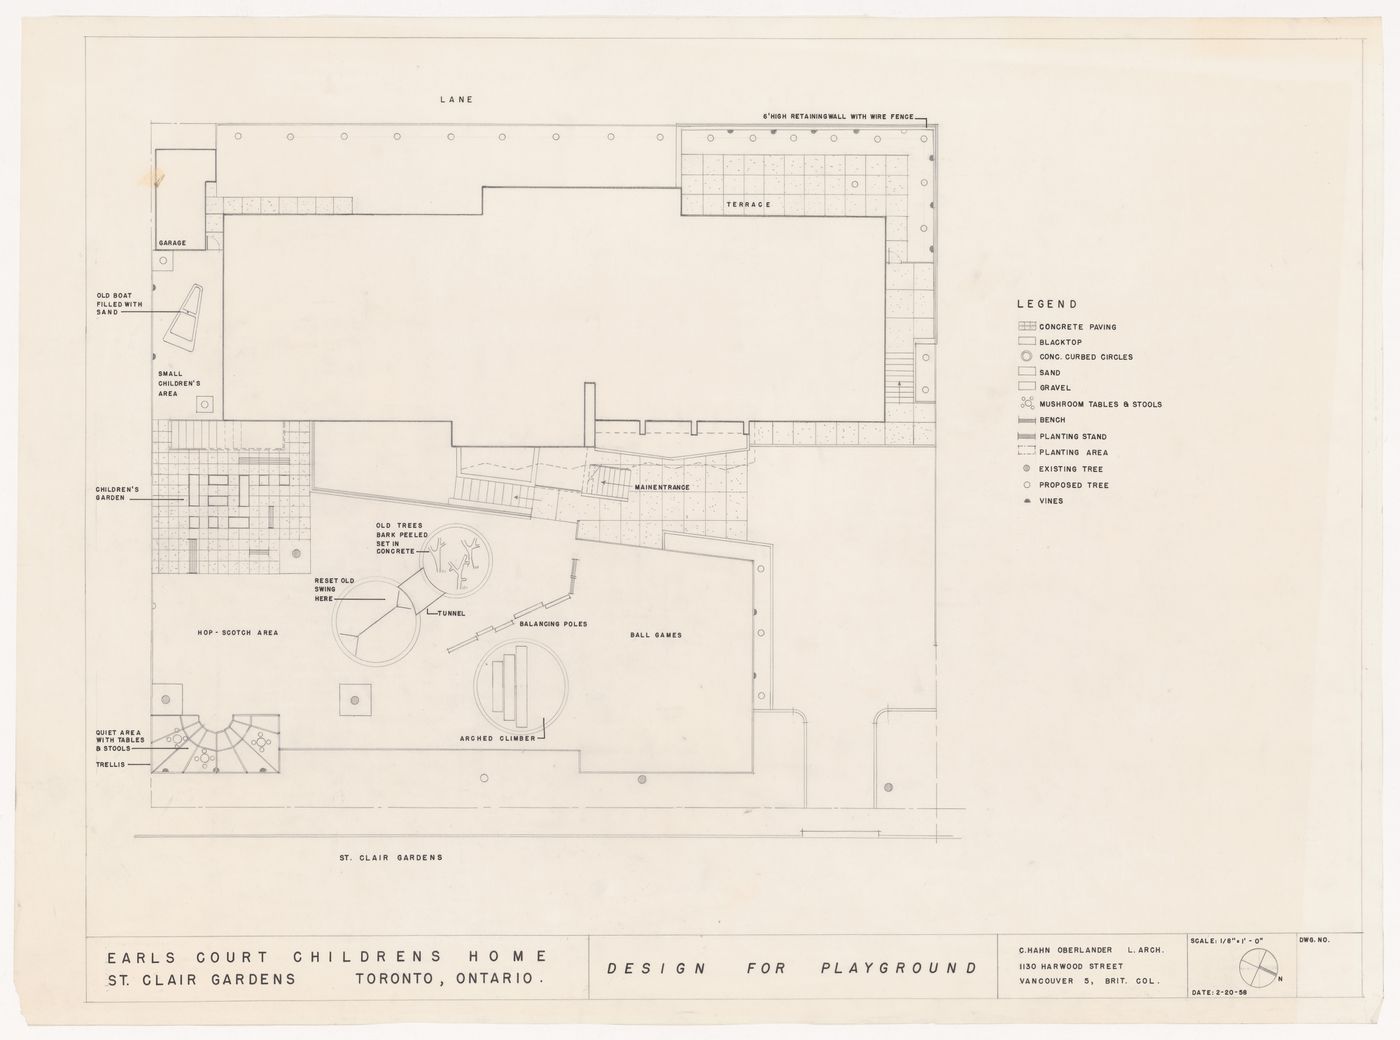 Plan for Earl's Court Children's Home, St. Clair Gardens, Vancouver, British Columbia